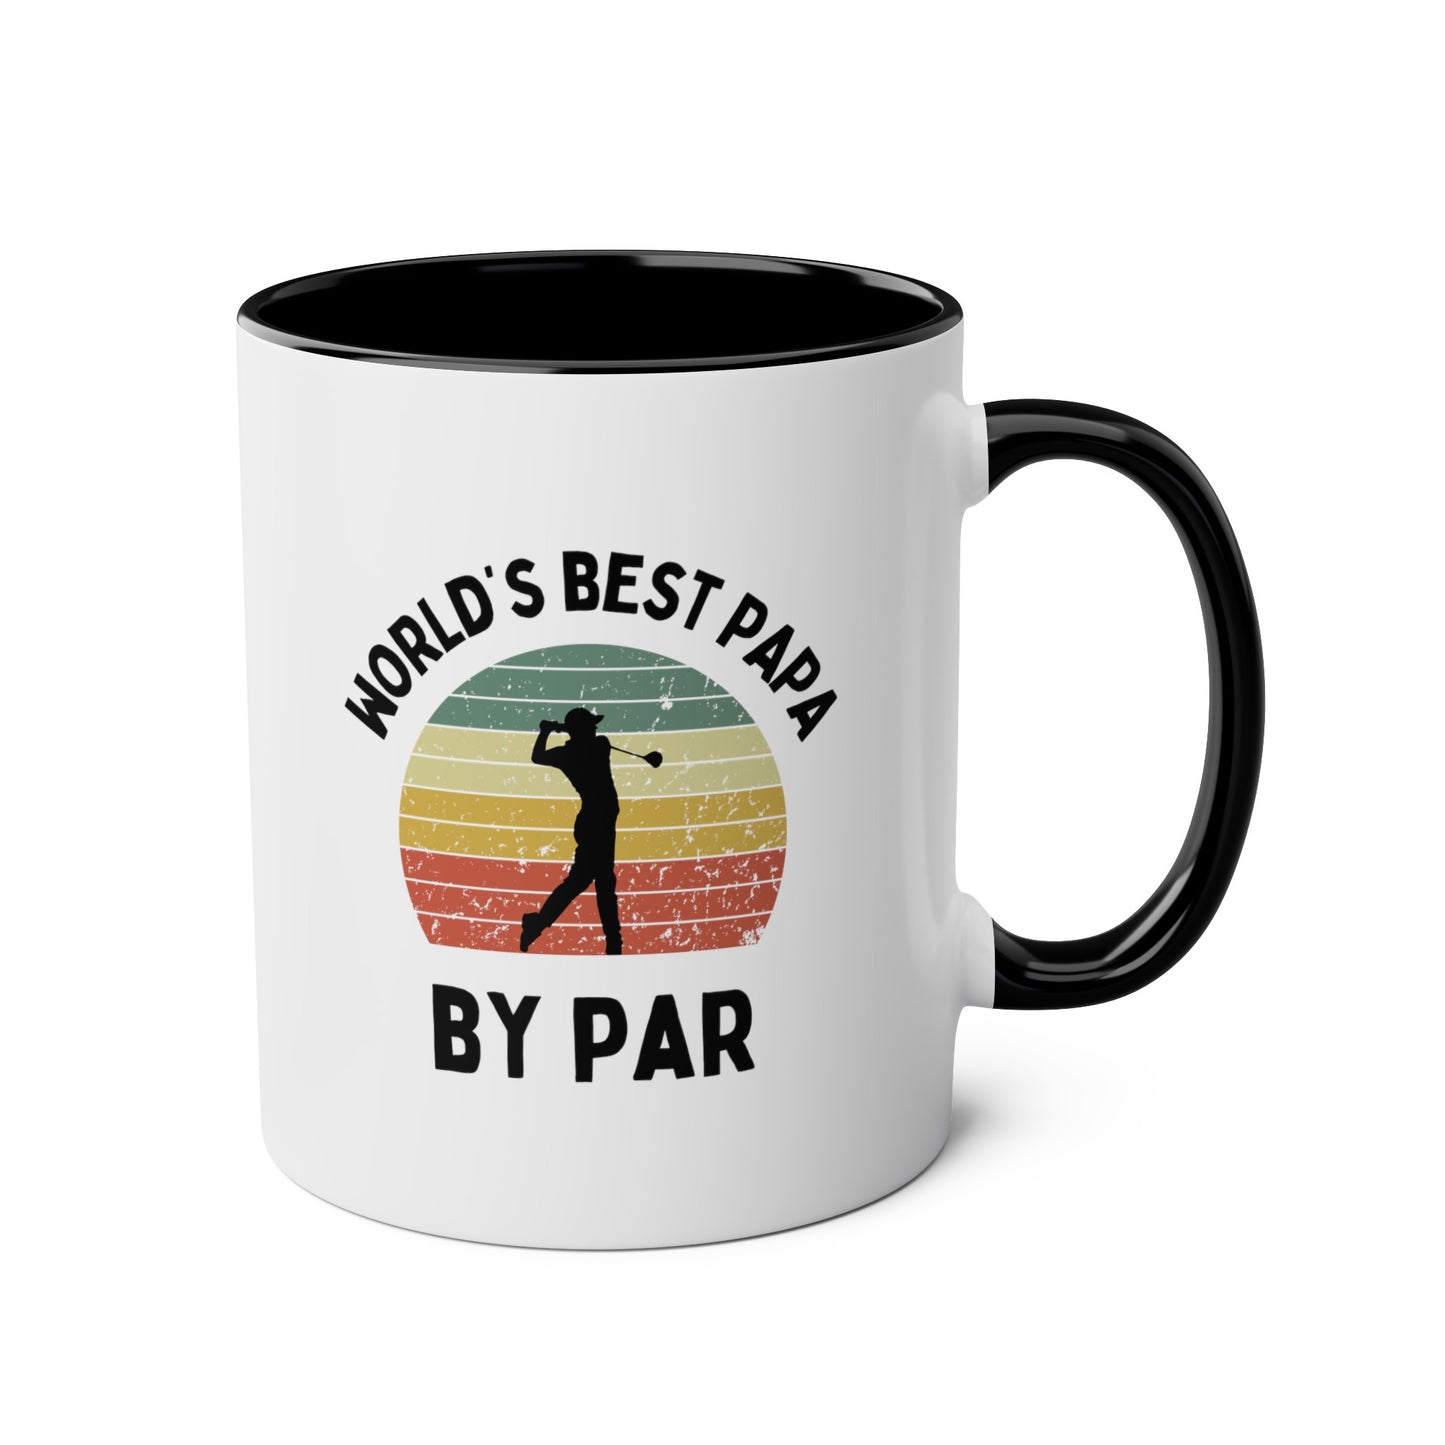 World's Best Papa By Par 11oz white with black accent funny coffee mug tea cup gift for him golfer vintage sunset golf men him grandad grandpa pops father's day waveywares wavey wares wavywares wavy wares